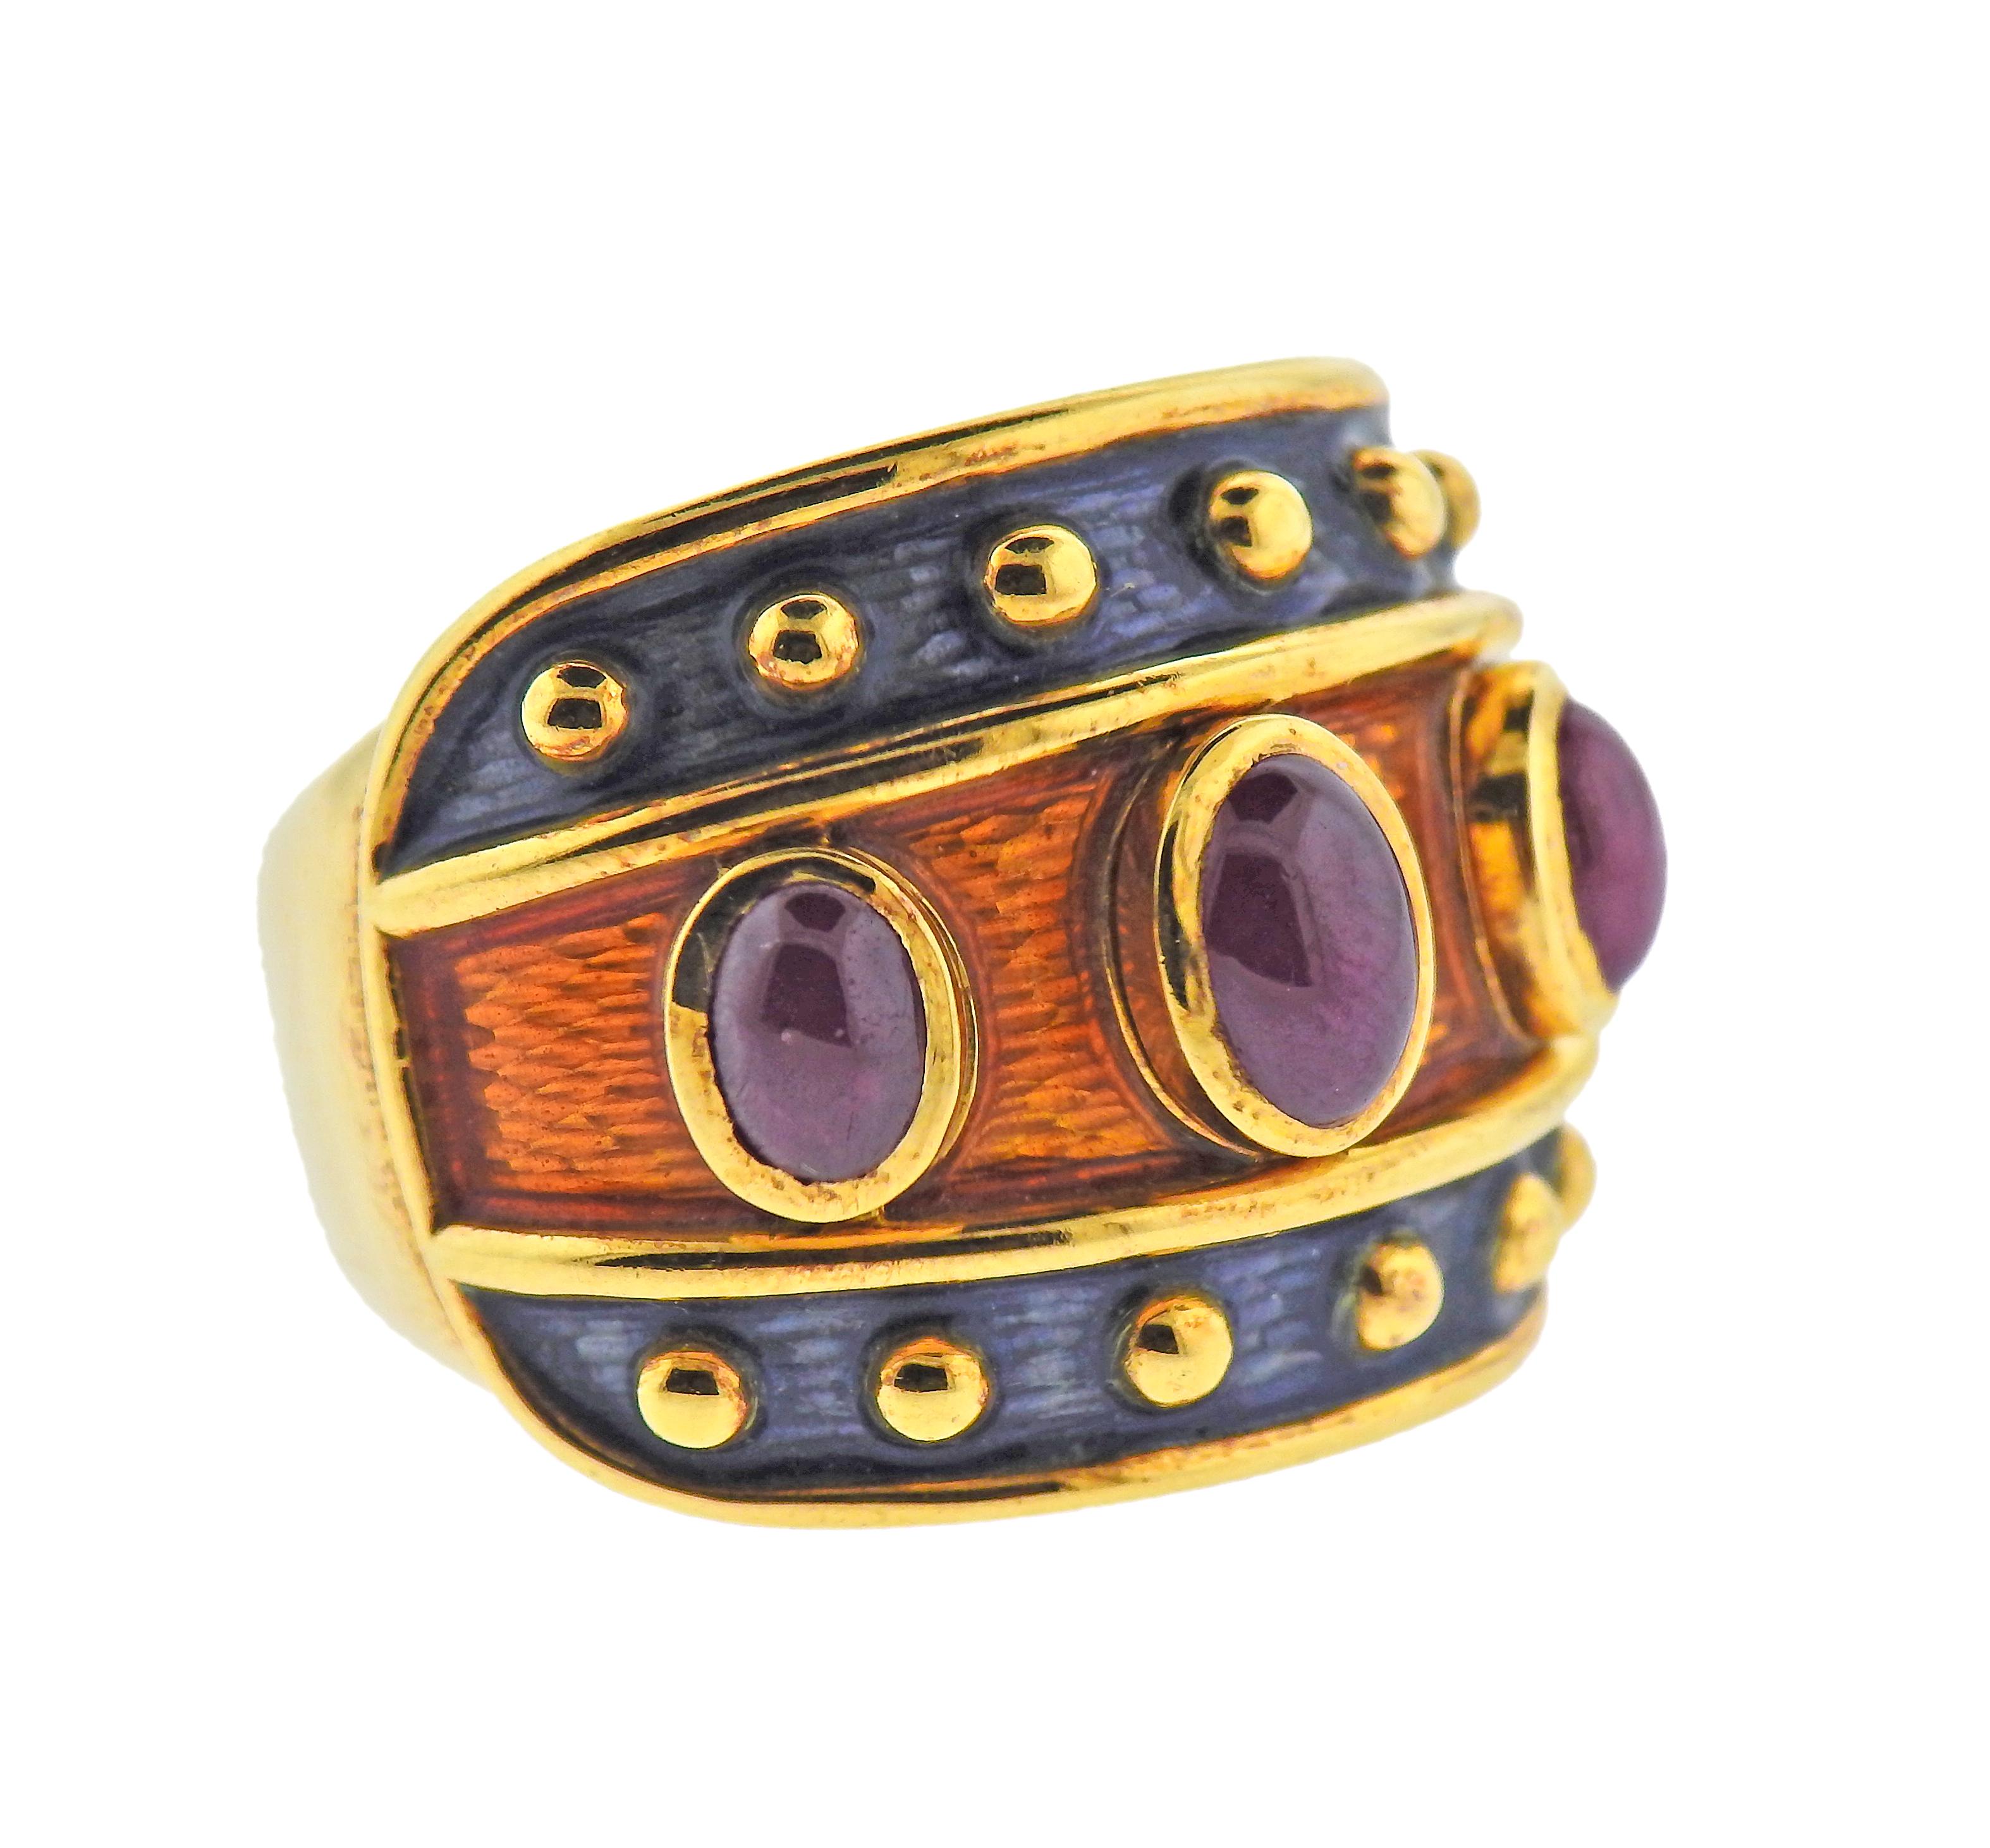 18k gold ring, decorated with enamel and 3 ruby cabochons. Ring size 7, ring top is 20mm wide. Marked with makers signature (illegible). Weight 0 30.4 grams.